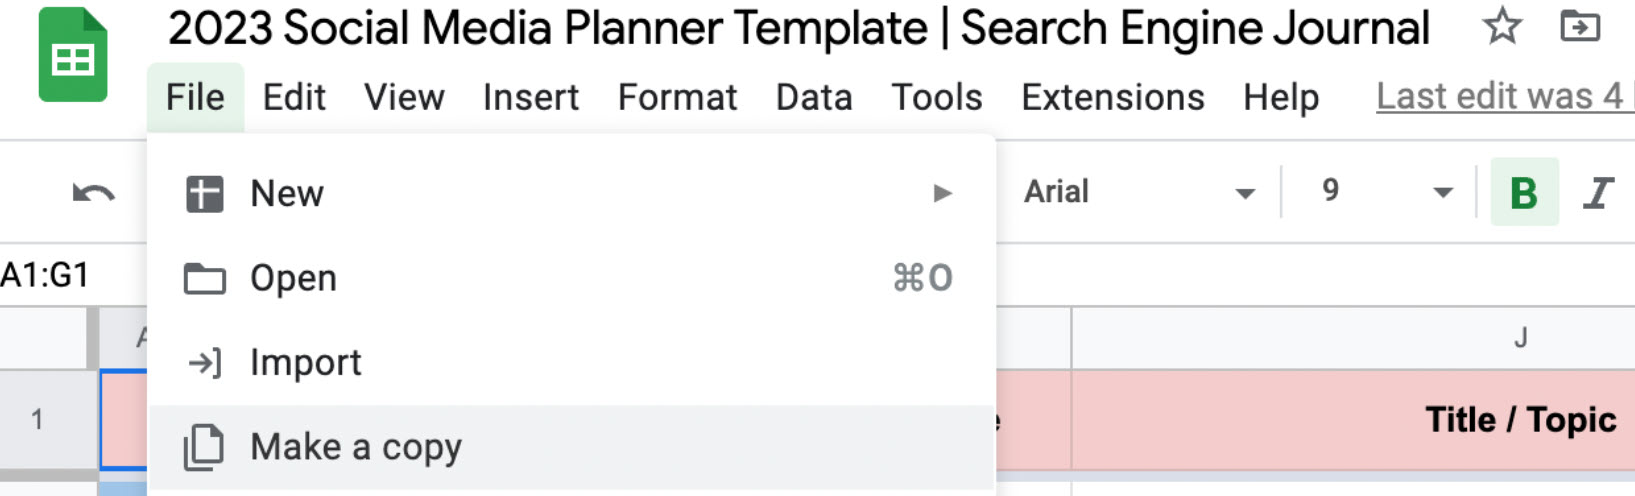 Social Media Planner: How To Plan Your Quarter (With Template)